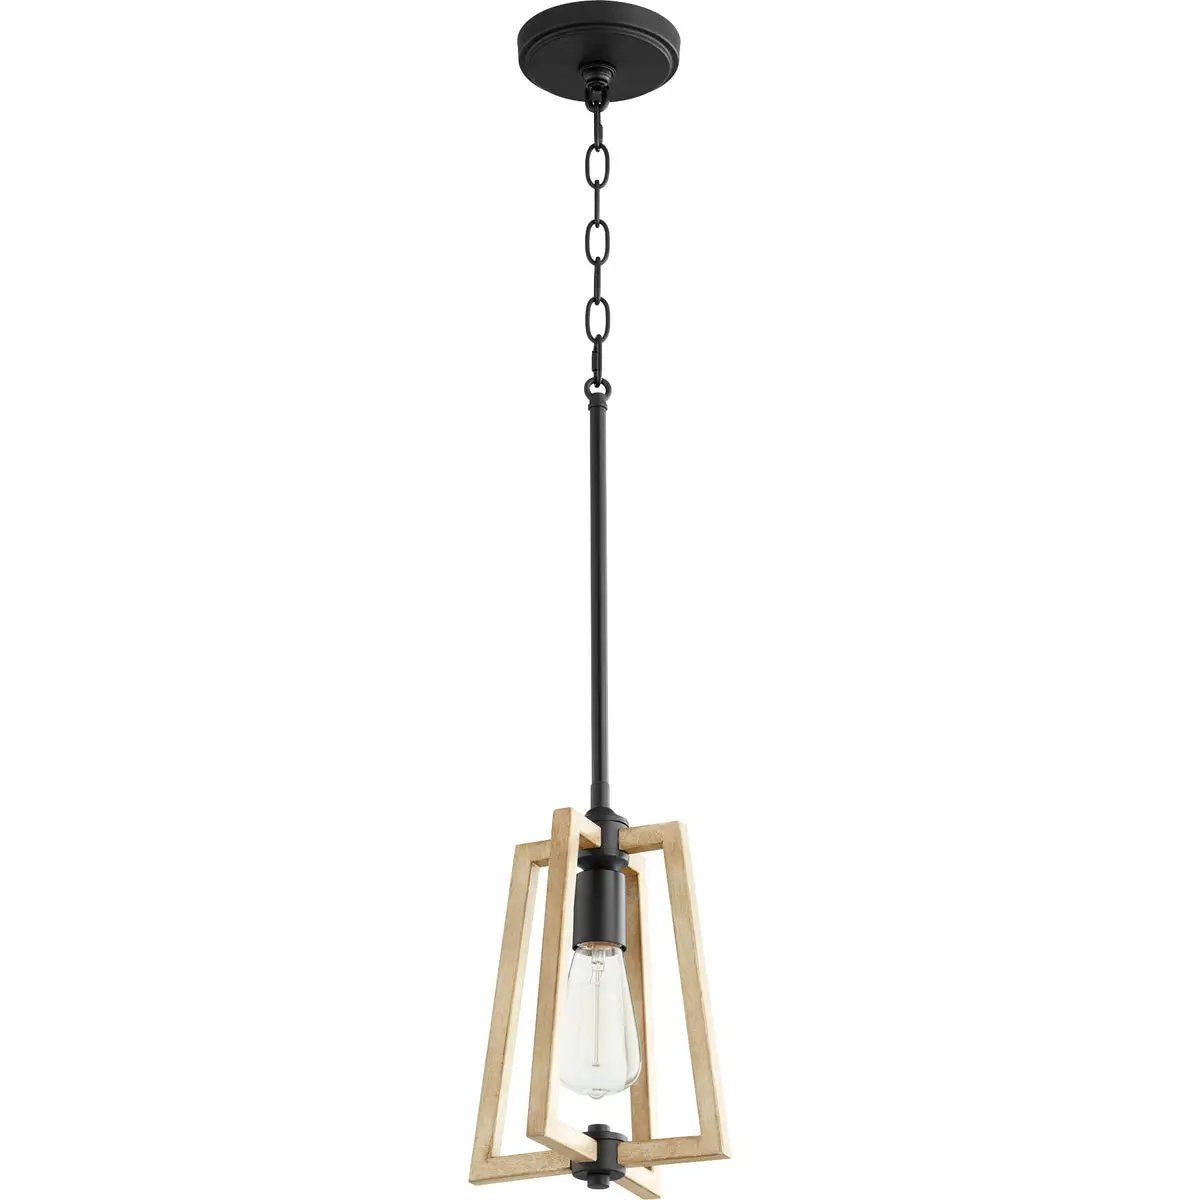 Modern Farmhouse Pendant Light with wood and metal frame, perfect for rustic style. Open-framed design, geometric shape. 100W, 1 bulb, dimmable. 8&quot;W x 12&quot;H. UL Listed, Dry Location. 2-year warranty.